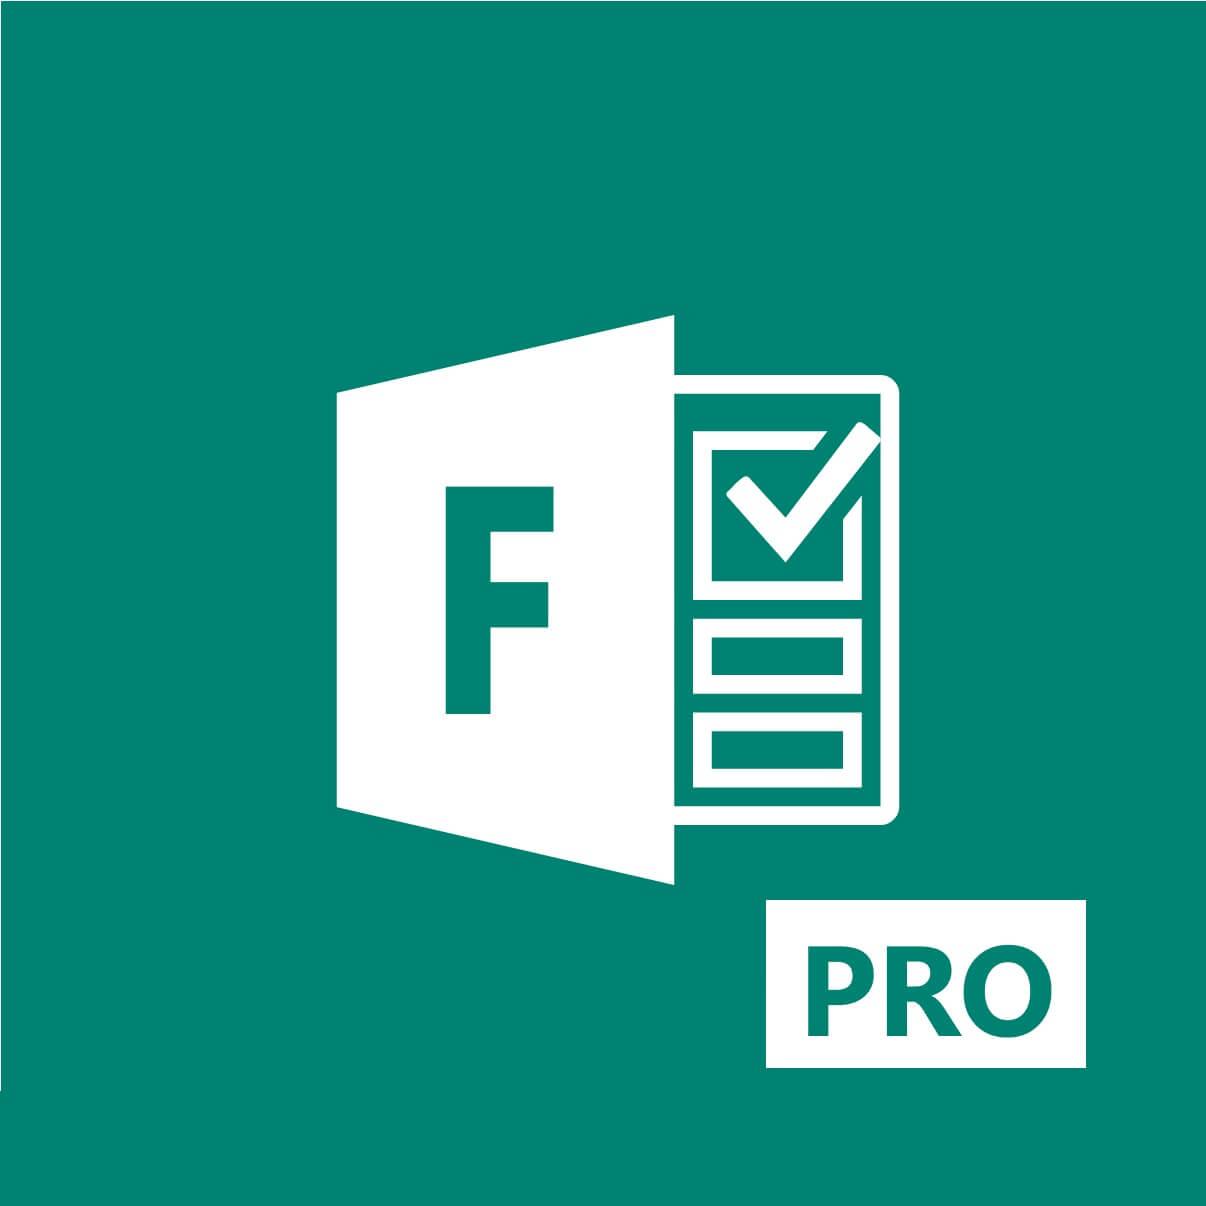 Forms Logo - Microsoft Forms Pro is now available to all Windows 10 users